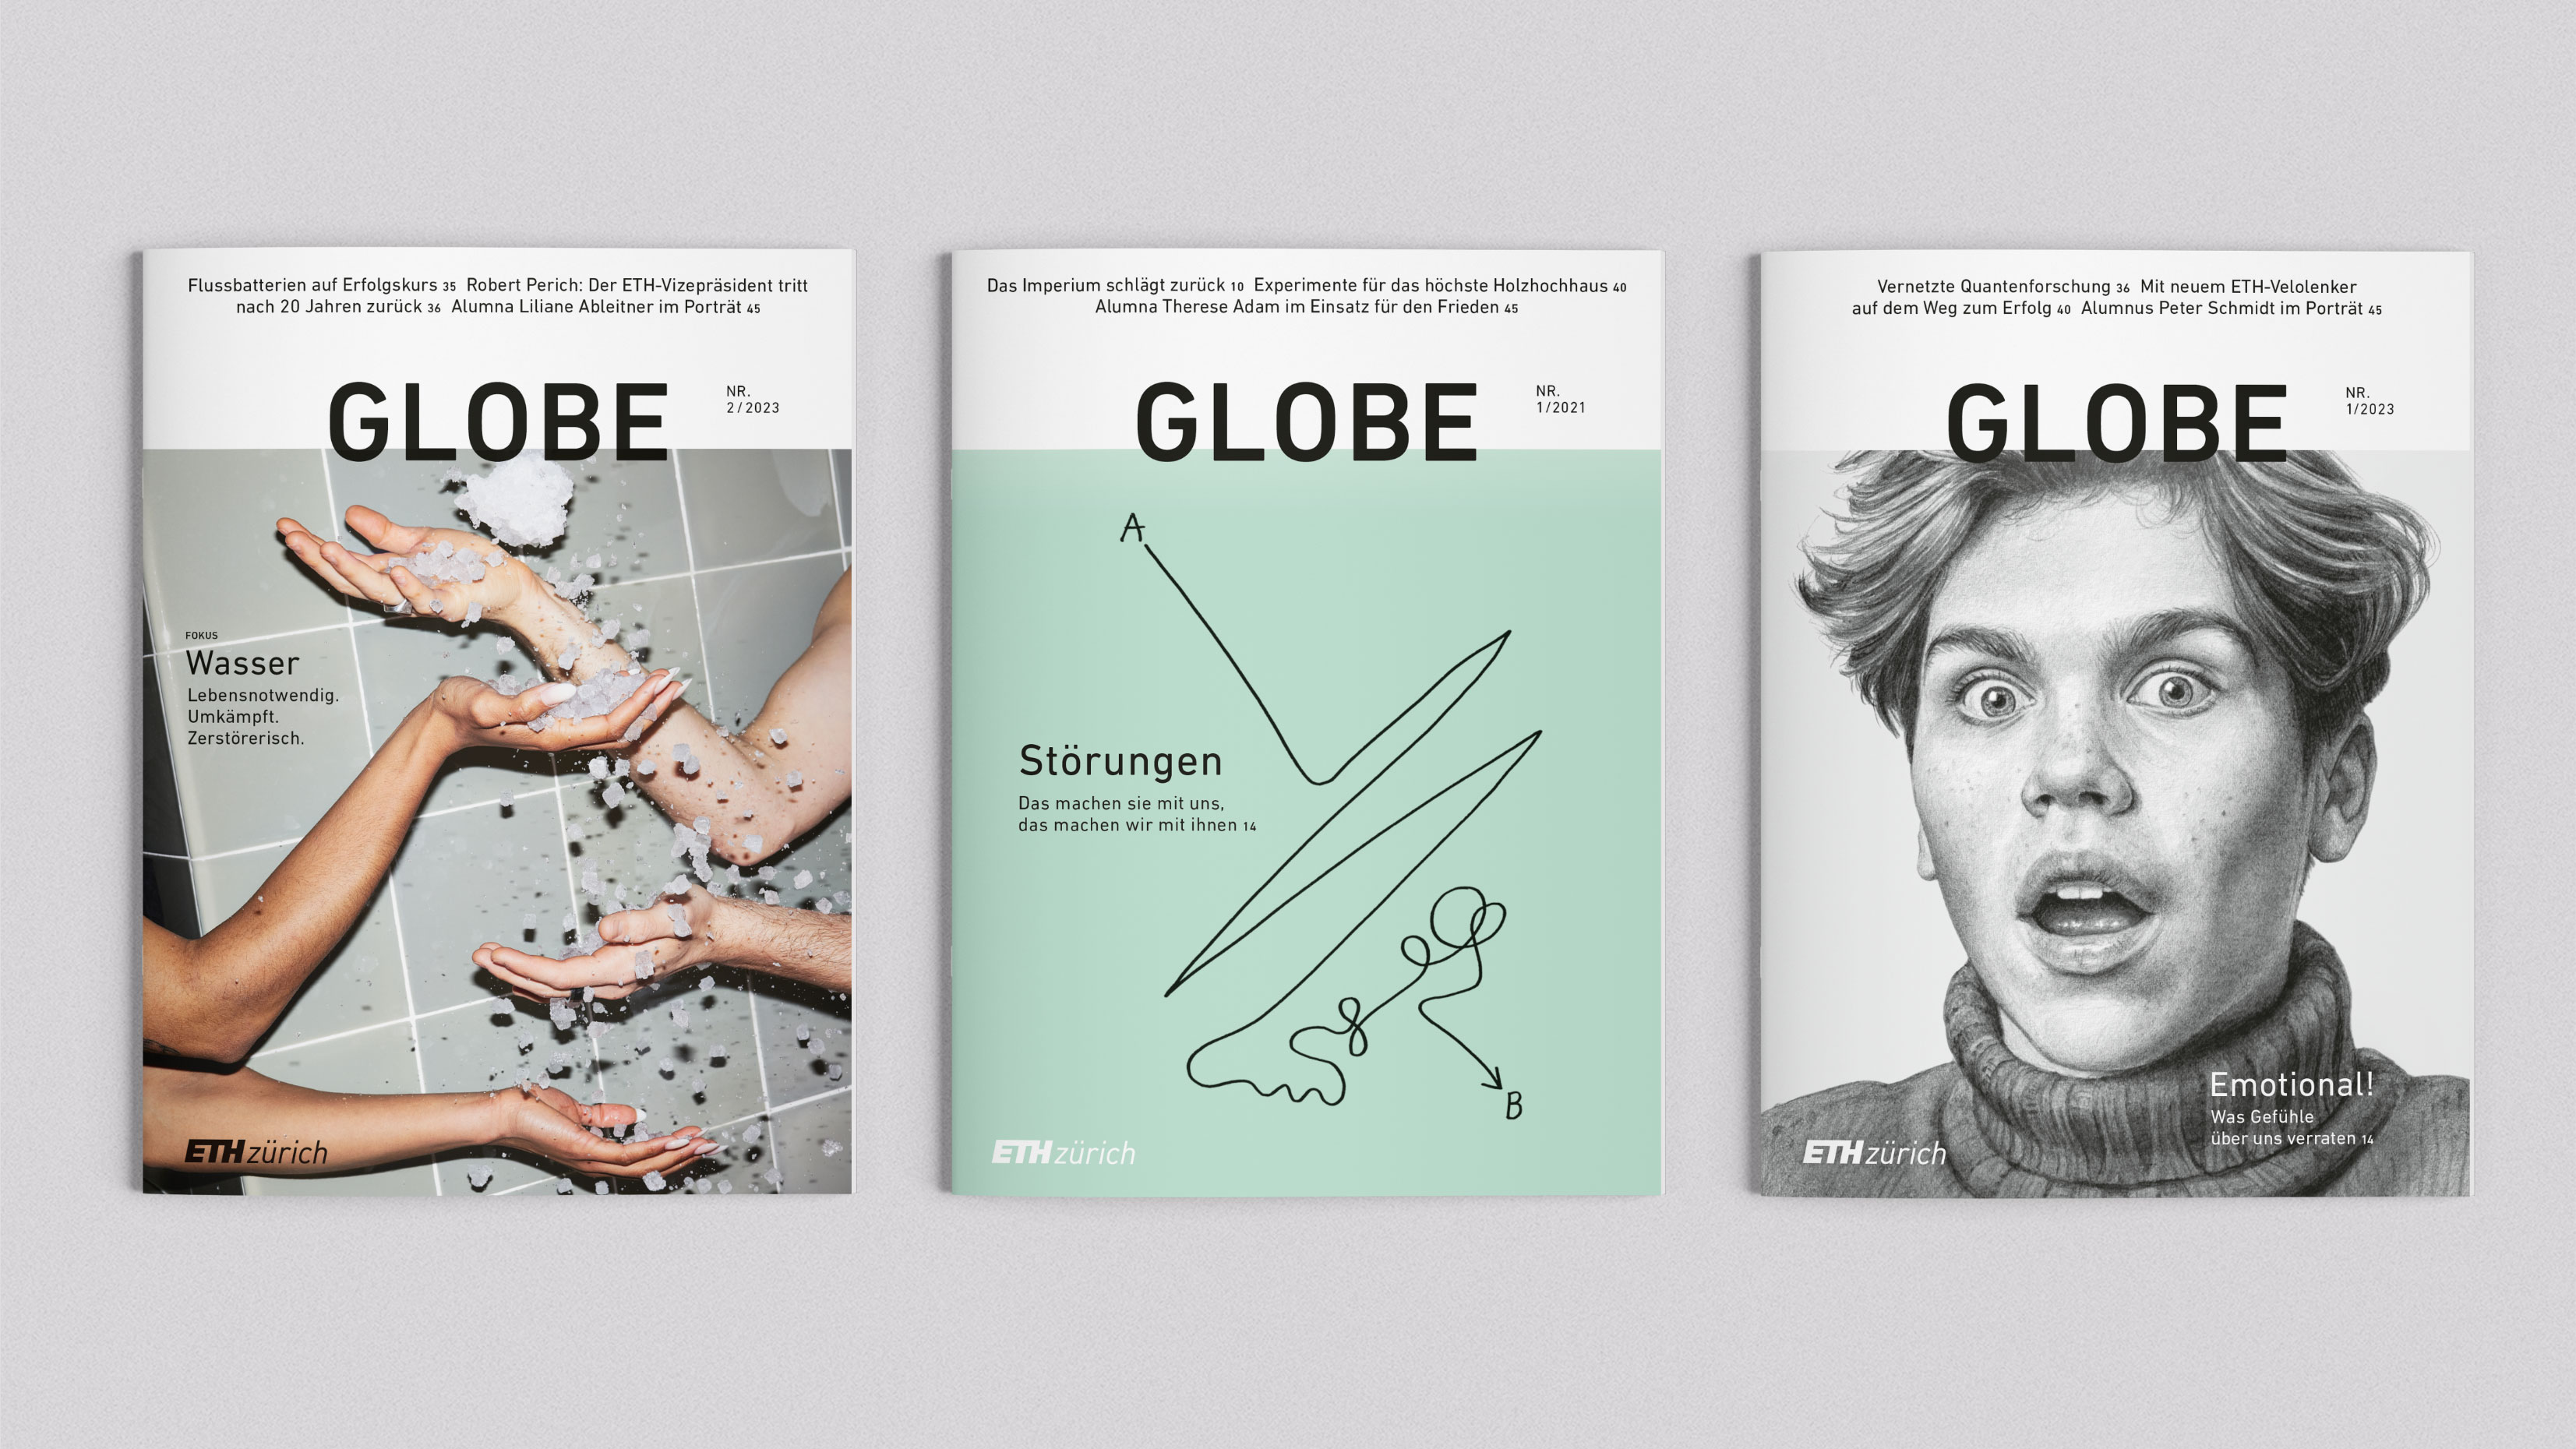 Three eye-catching Globe magazine covers highlighting the ETH Zurich brand, presenting engaging content and articles